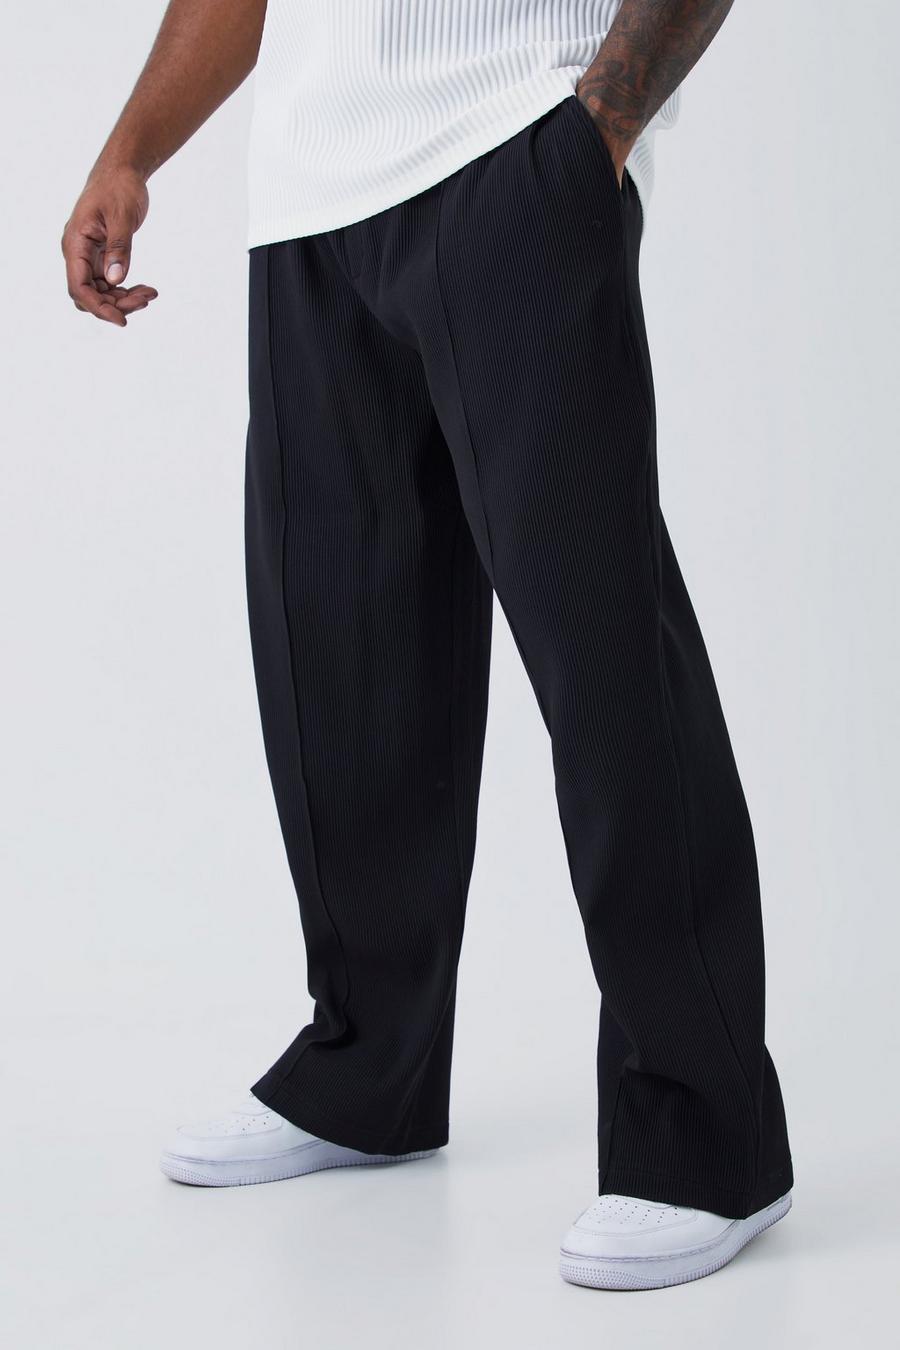 Black negro Plus Elastic Waist Relaxed Fit Pleated Trouser